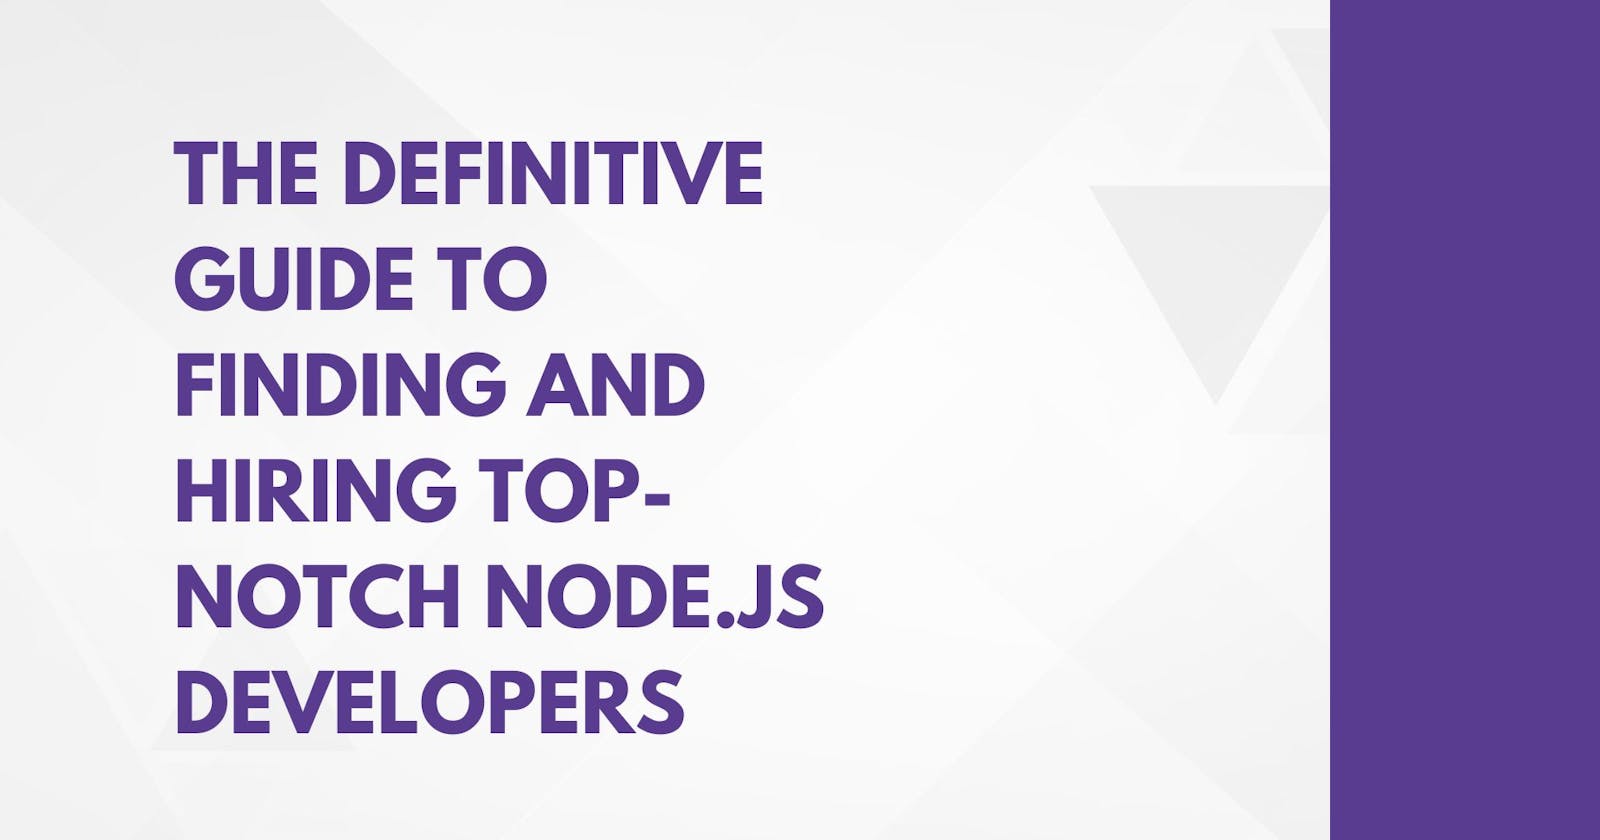 The Definitive Guide to Finding and Hiring Top-Notch Node.js Developers